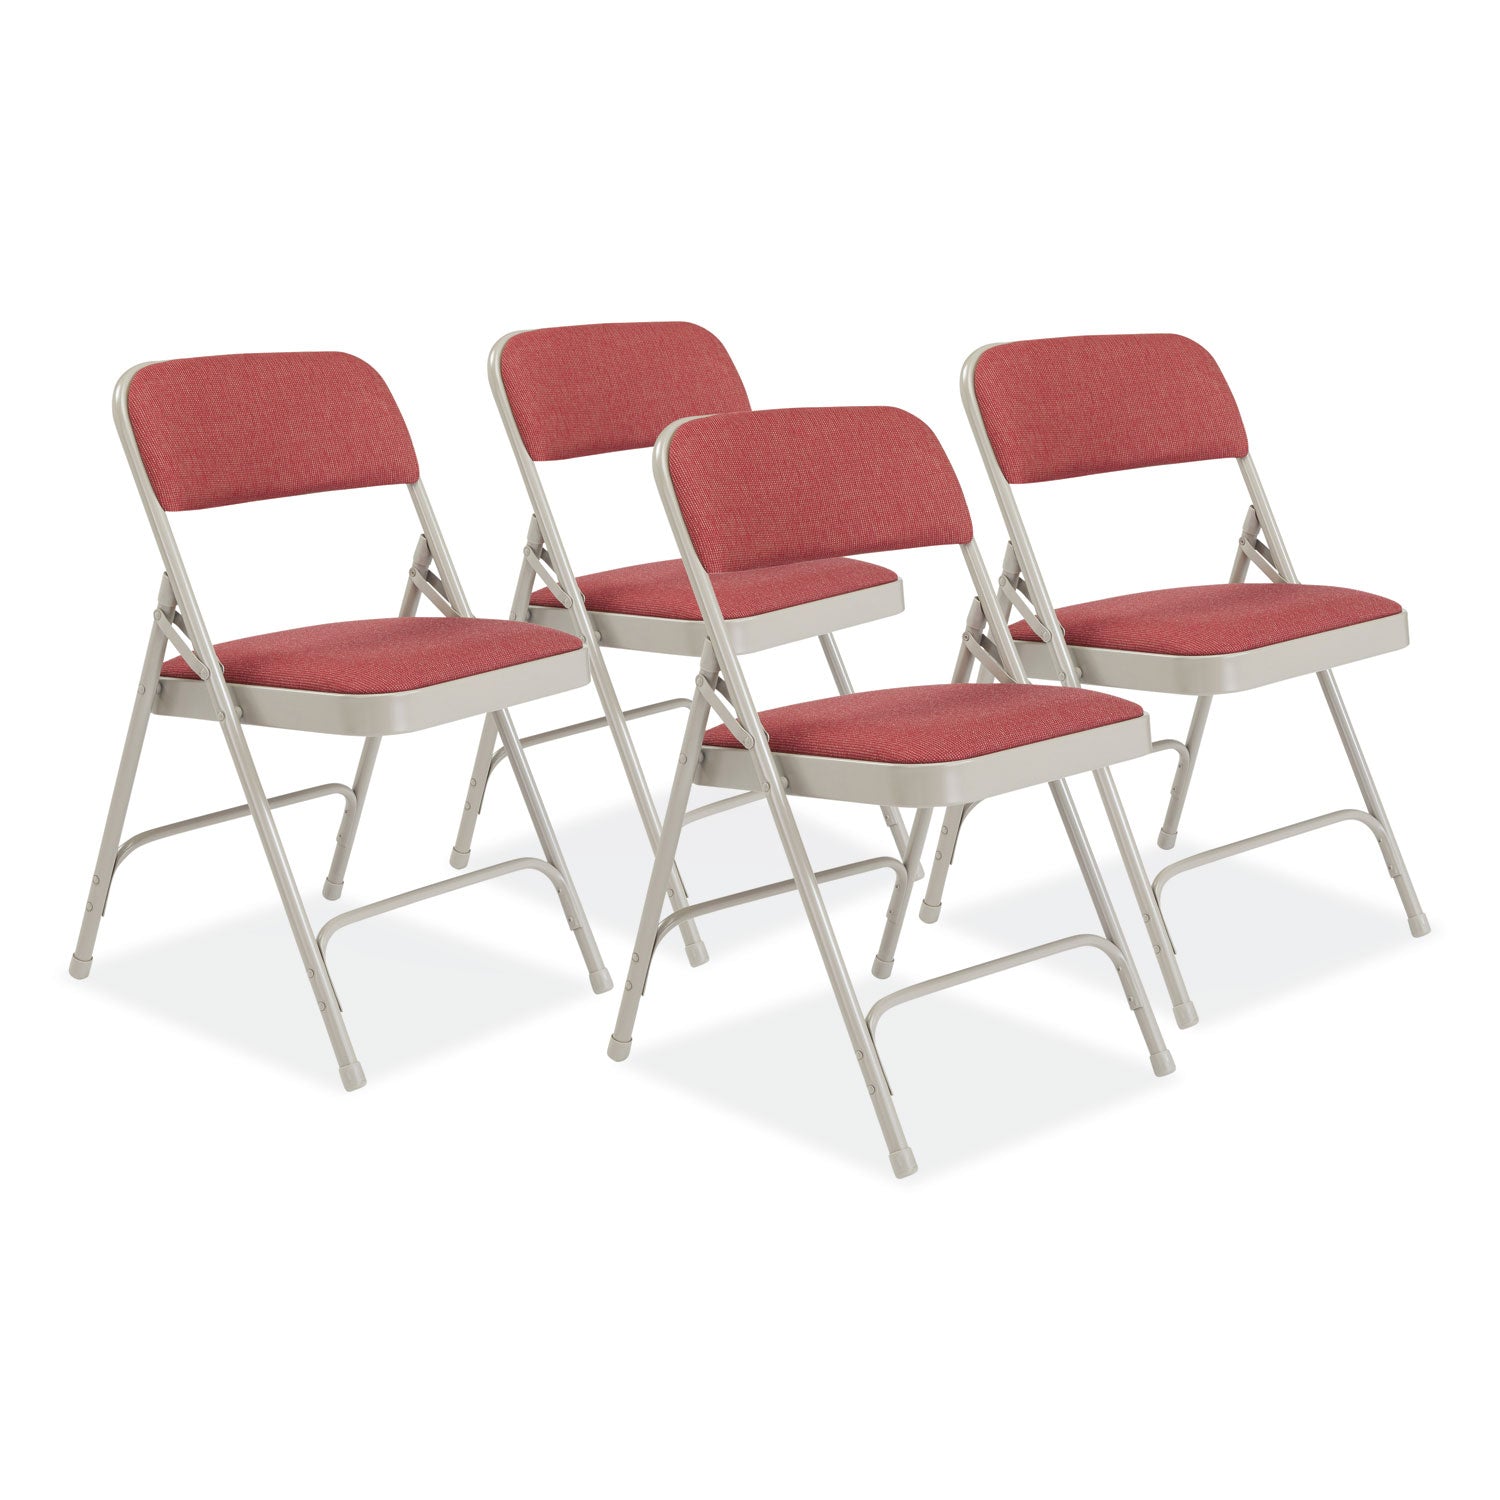 2200-series-fabric-dual-hinge-premium-folding-chair-supports-500lb-cabernet-seat-backgray-base4-ct-ships-in-1-3-bus-days_nps2208 - 1